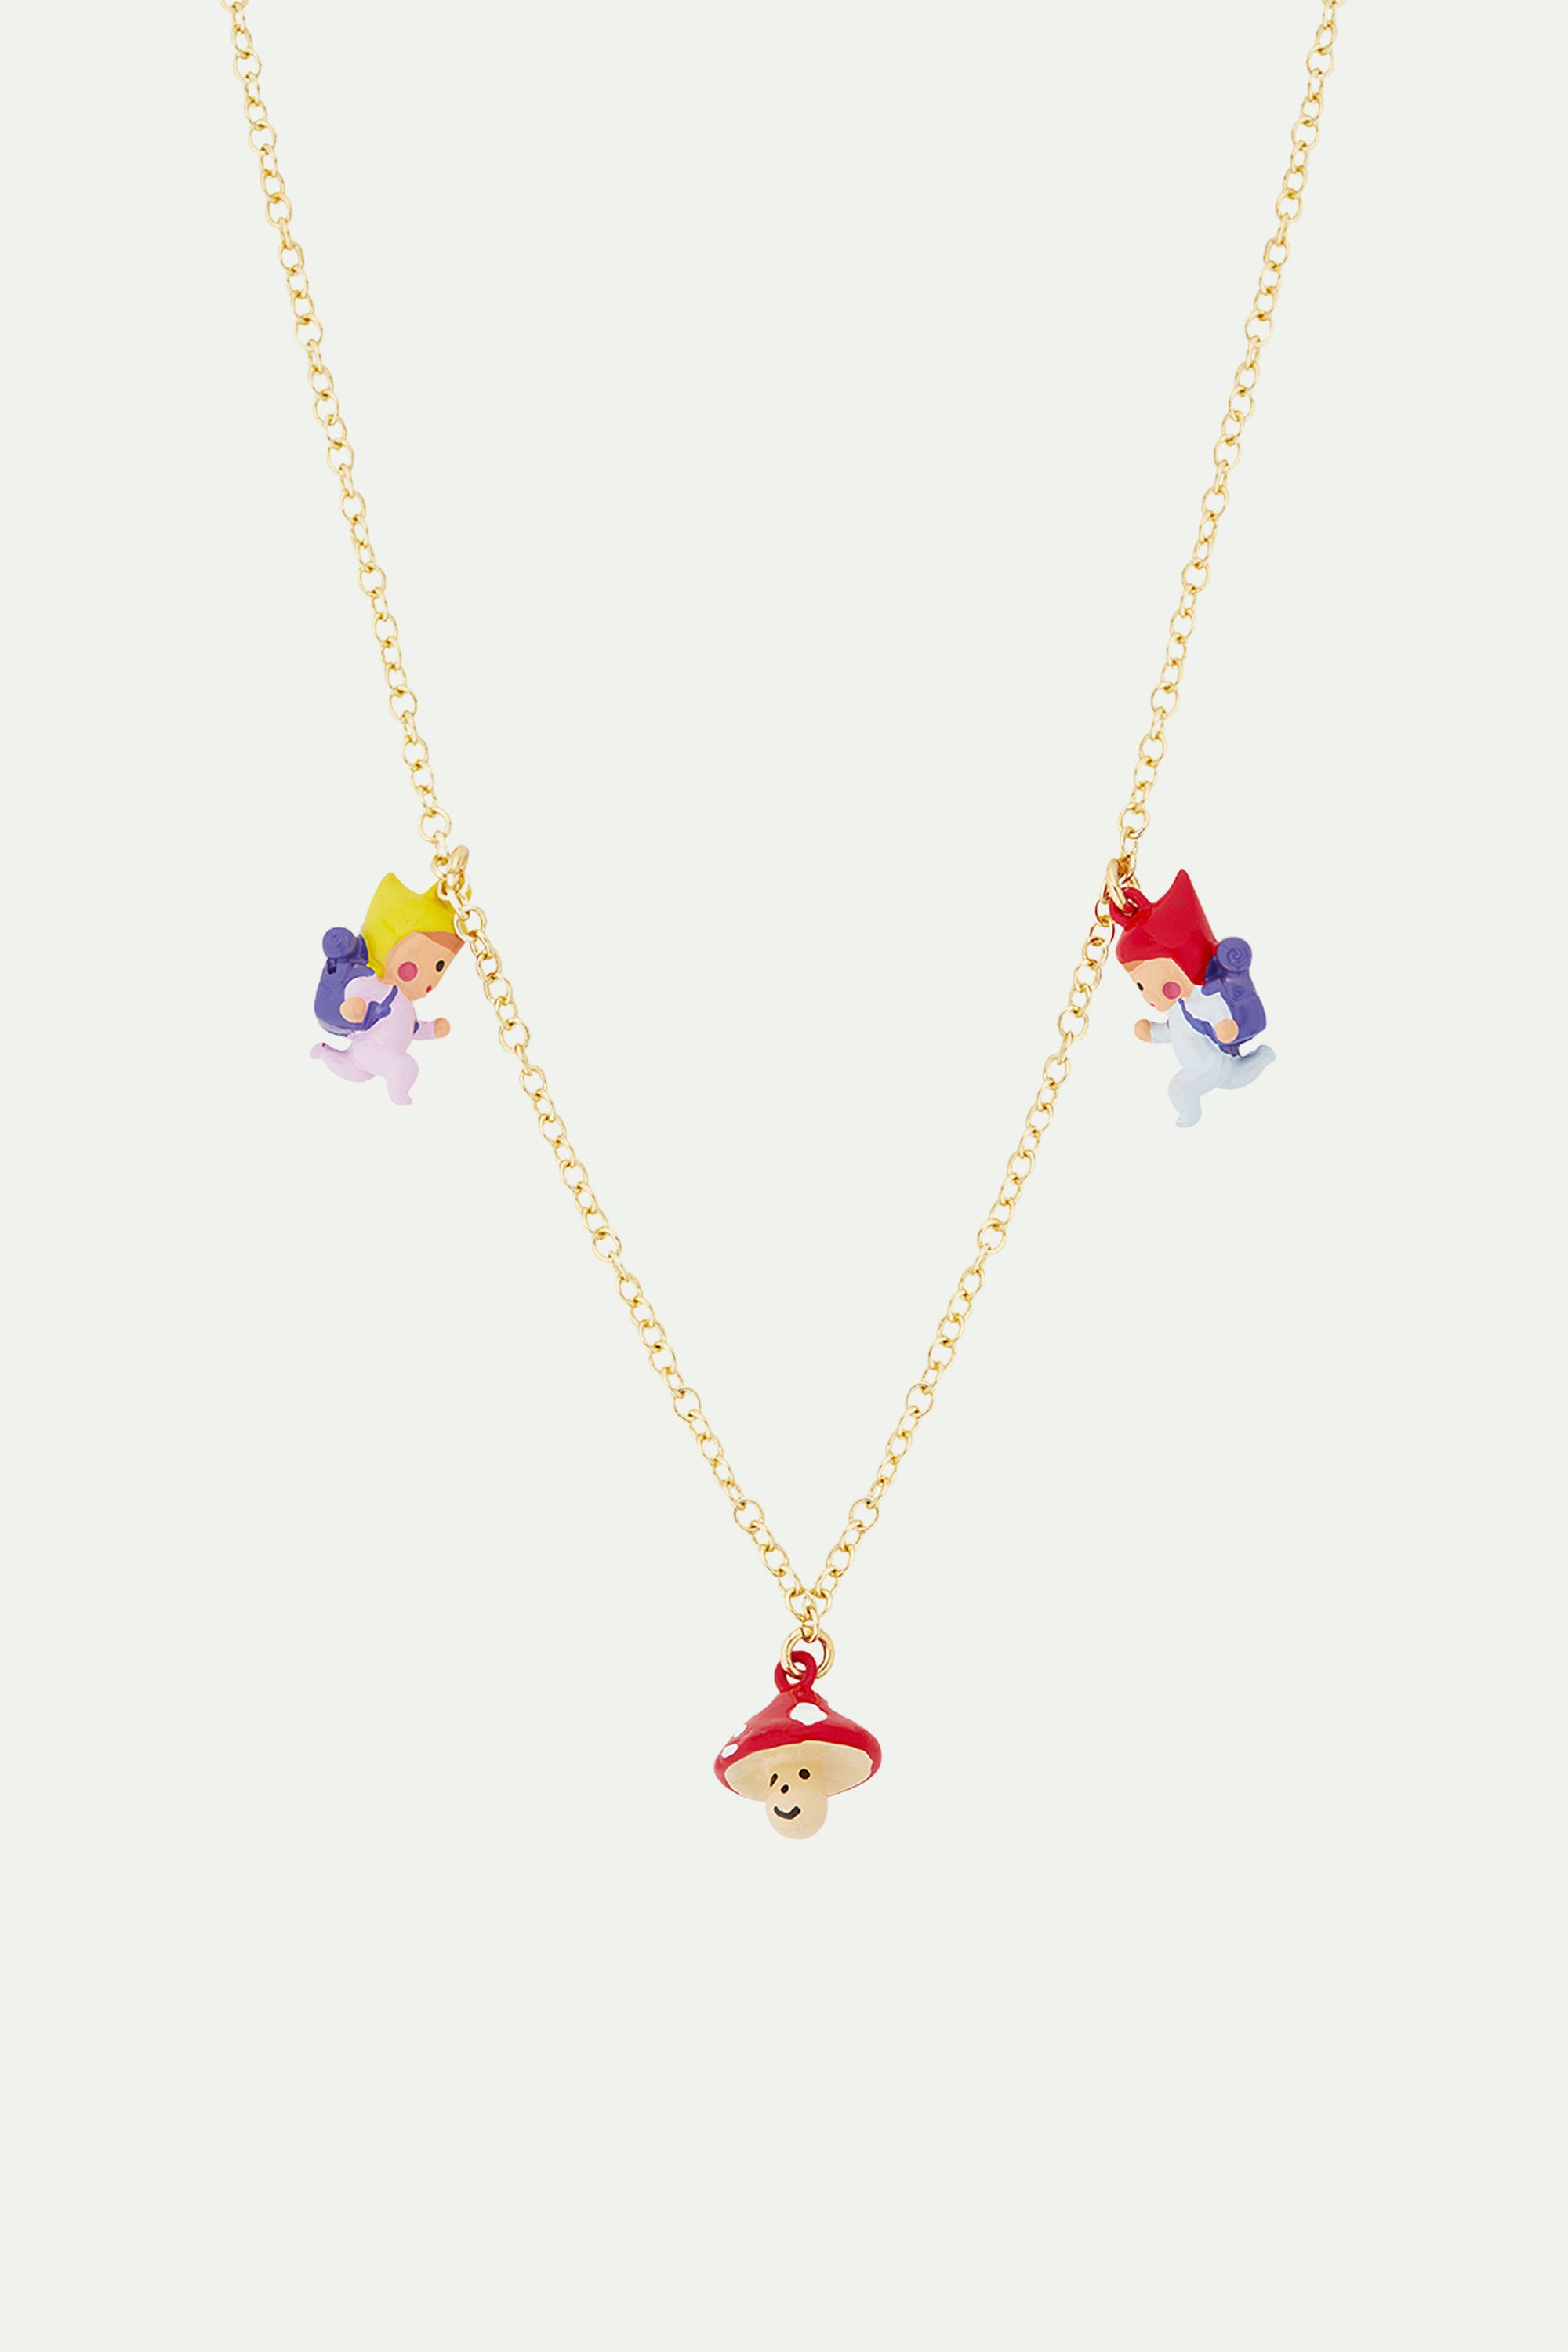 Hiking young gnomes and mushroom charm necklace